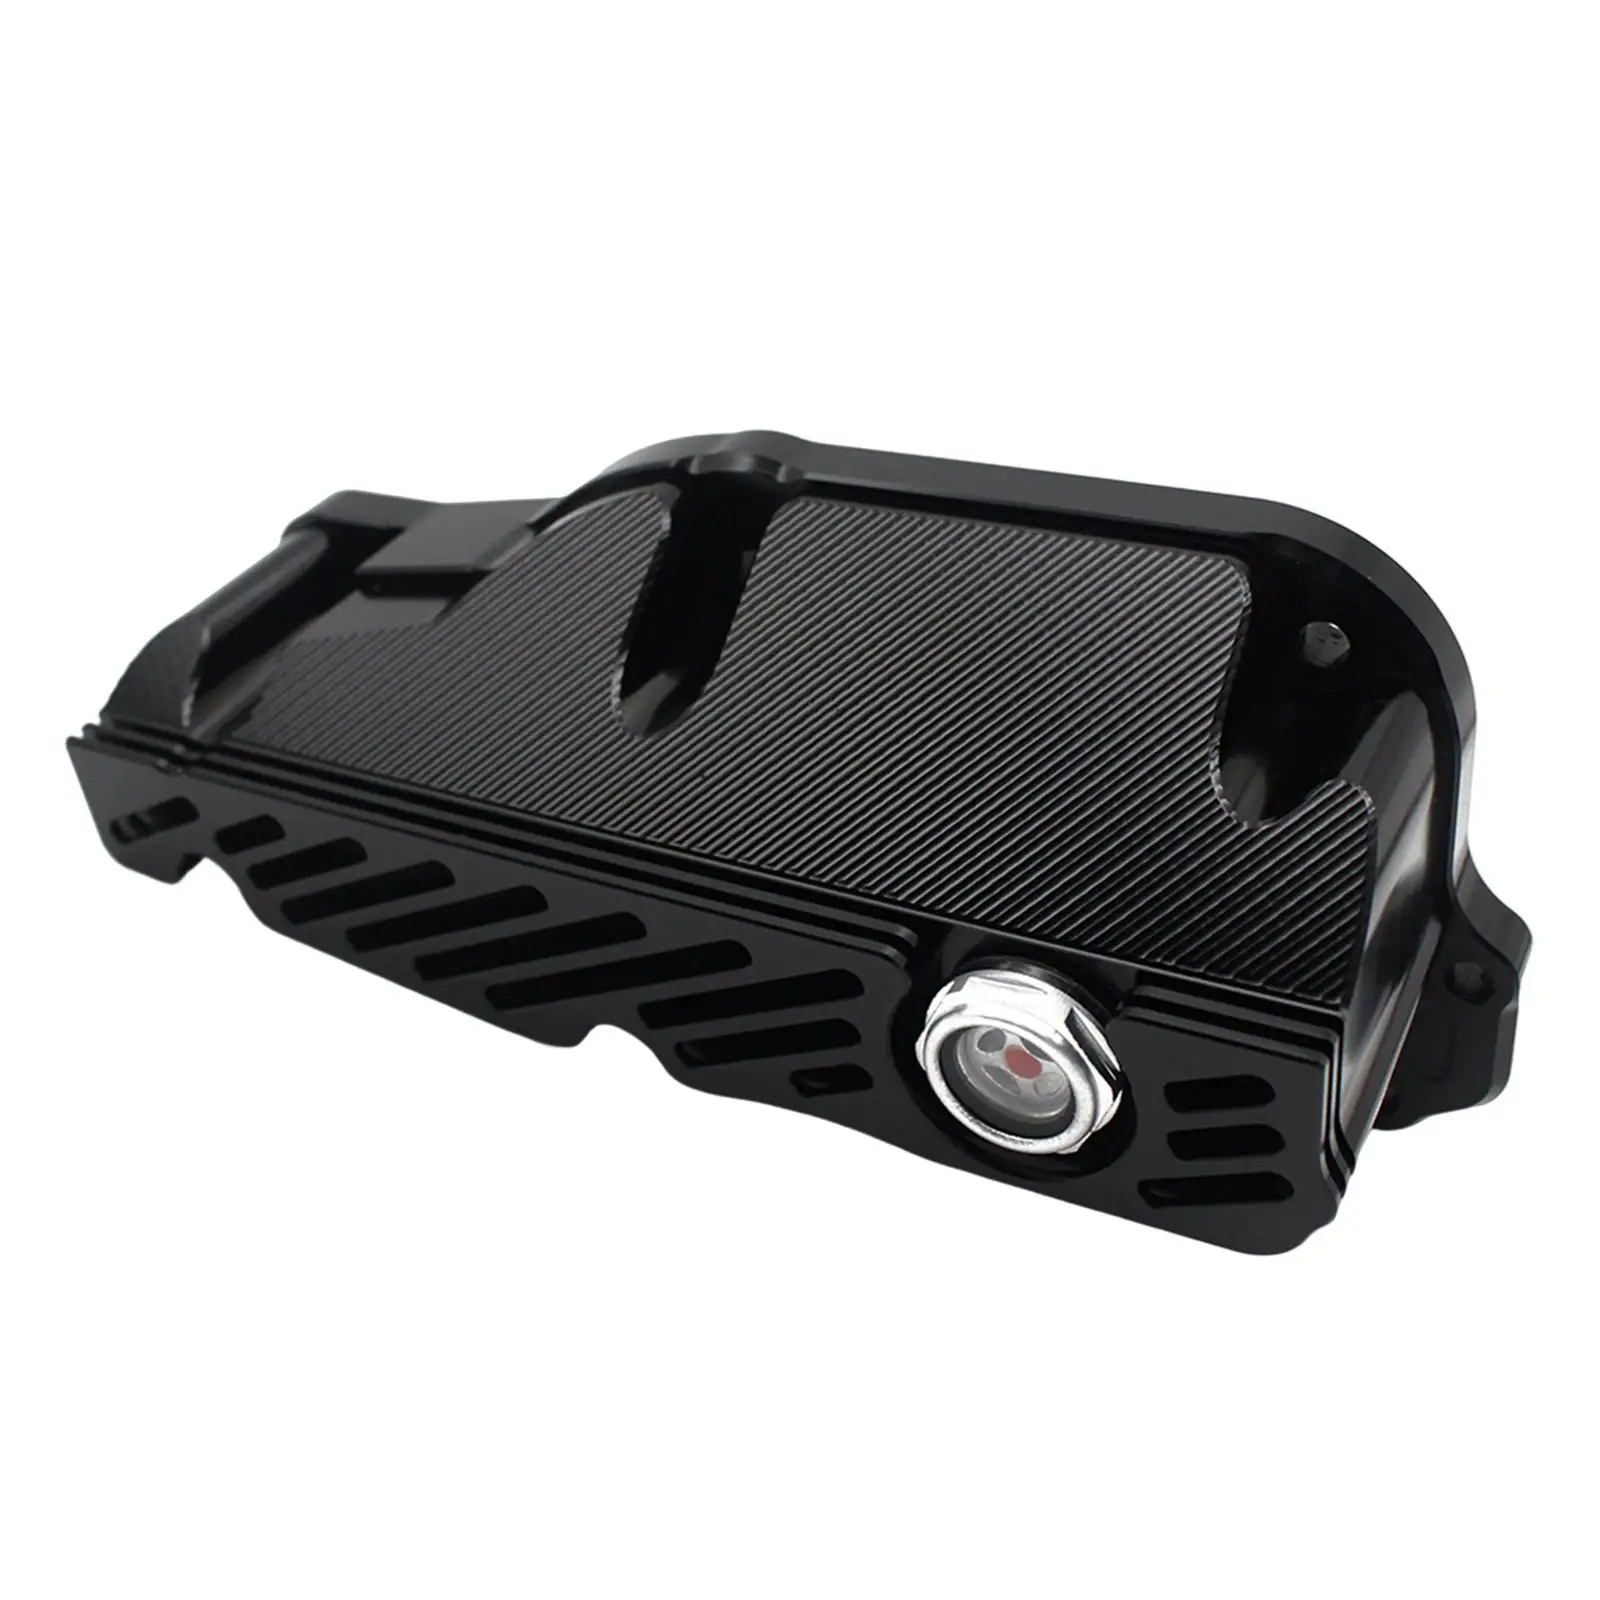 Sump Engine Oil Pan Aluminum Alloy for Vespa GTS-300 Car Accessories Easy to Install High Performance Engine Parts